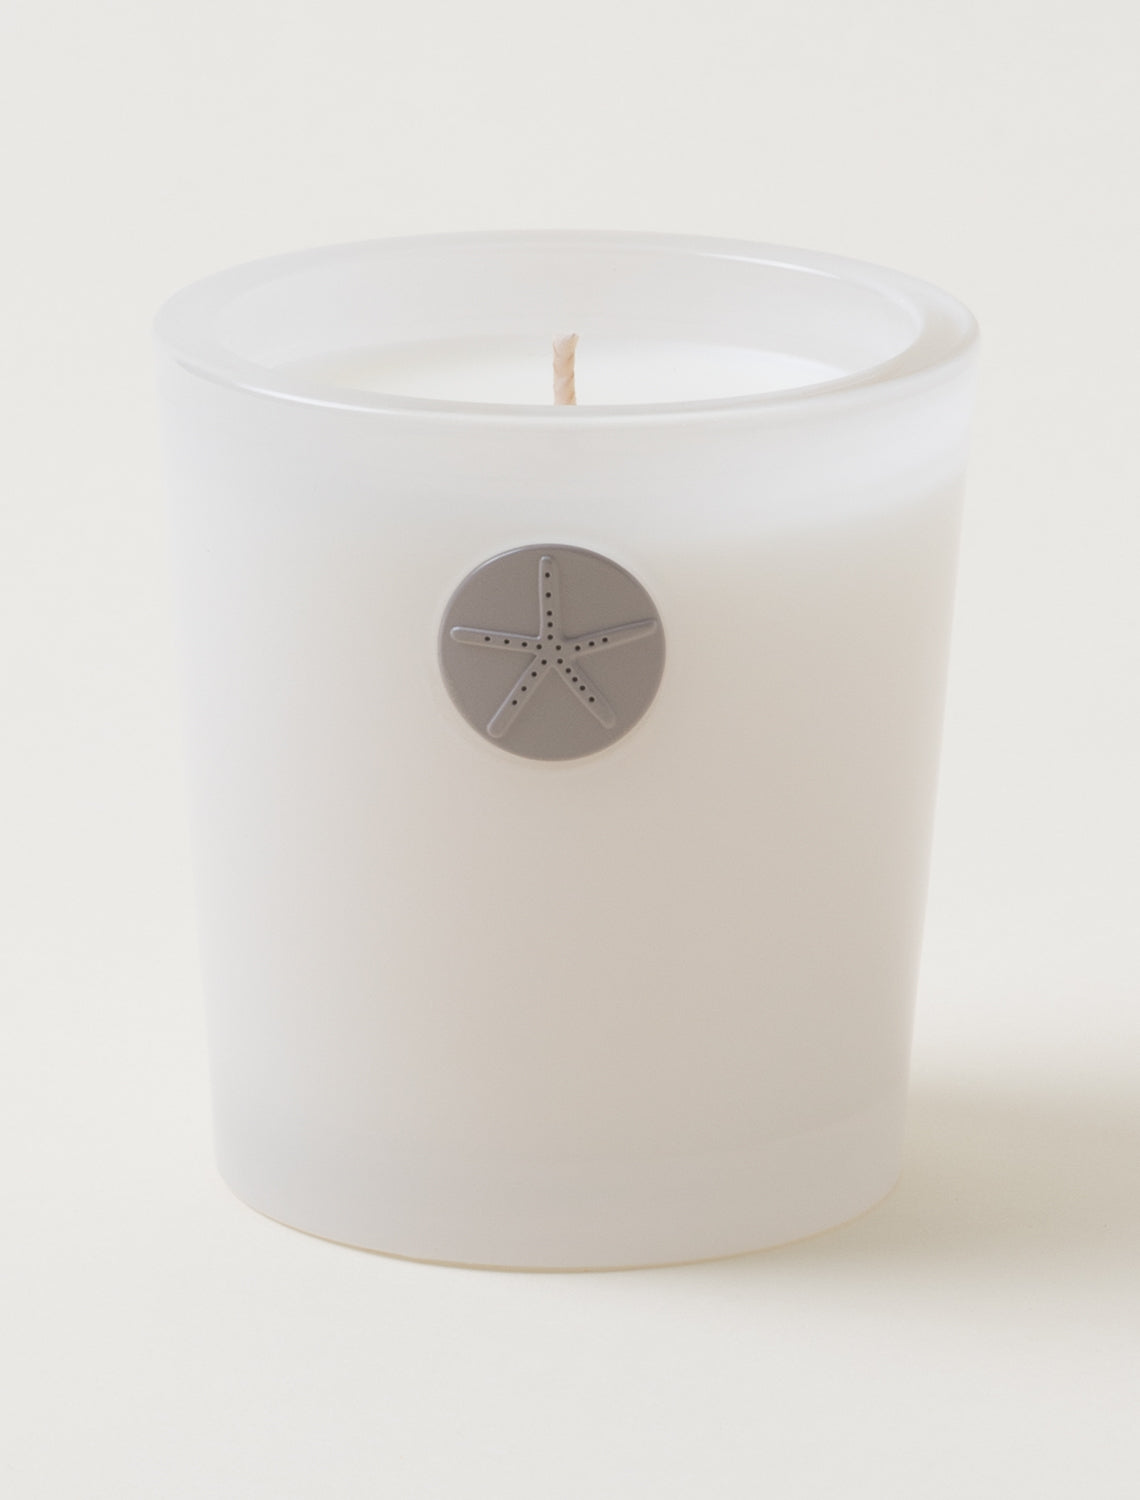 Barefoot Dreams Sandalwood Luxe Soy Candle